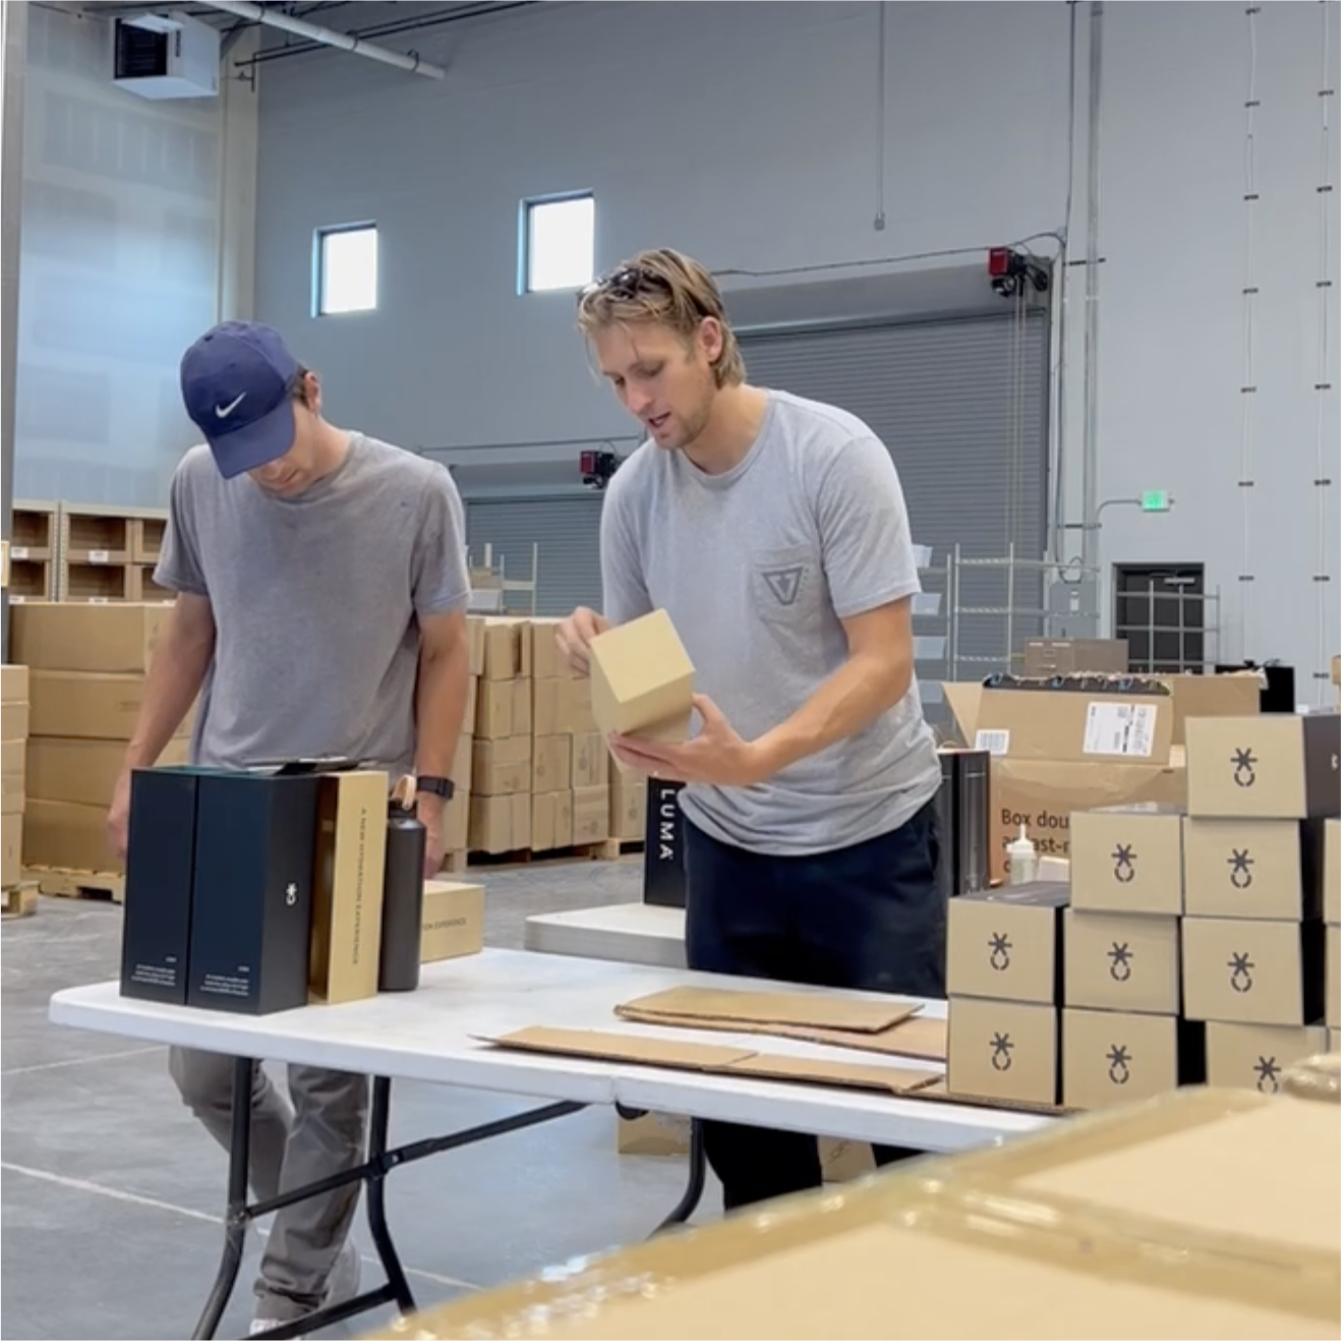 Jaden and Willy prepping the first Luma 1.0 units to ship to early buyers